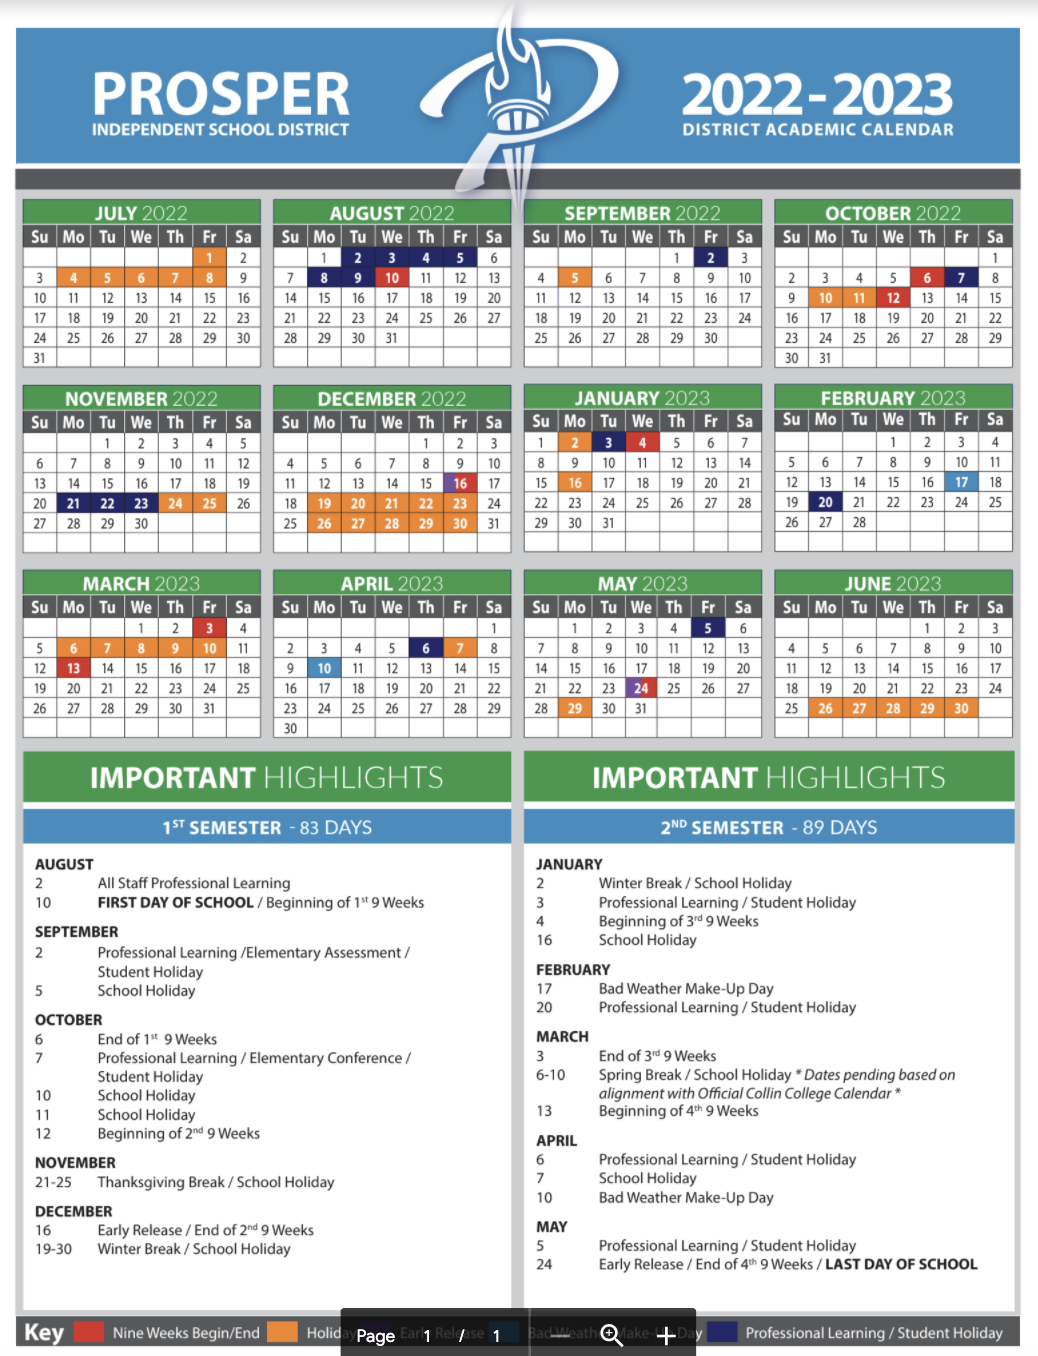 Pisd 2022 23 Calendar Here Are Prosper Isd's School Calendars For The 2022-2023 And The 2023-2024  School Years | Cities | Checkoutdfw.com